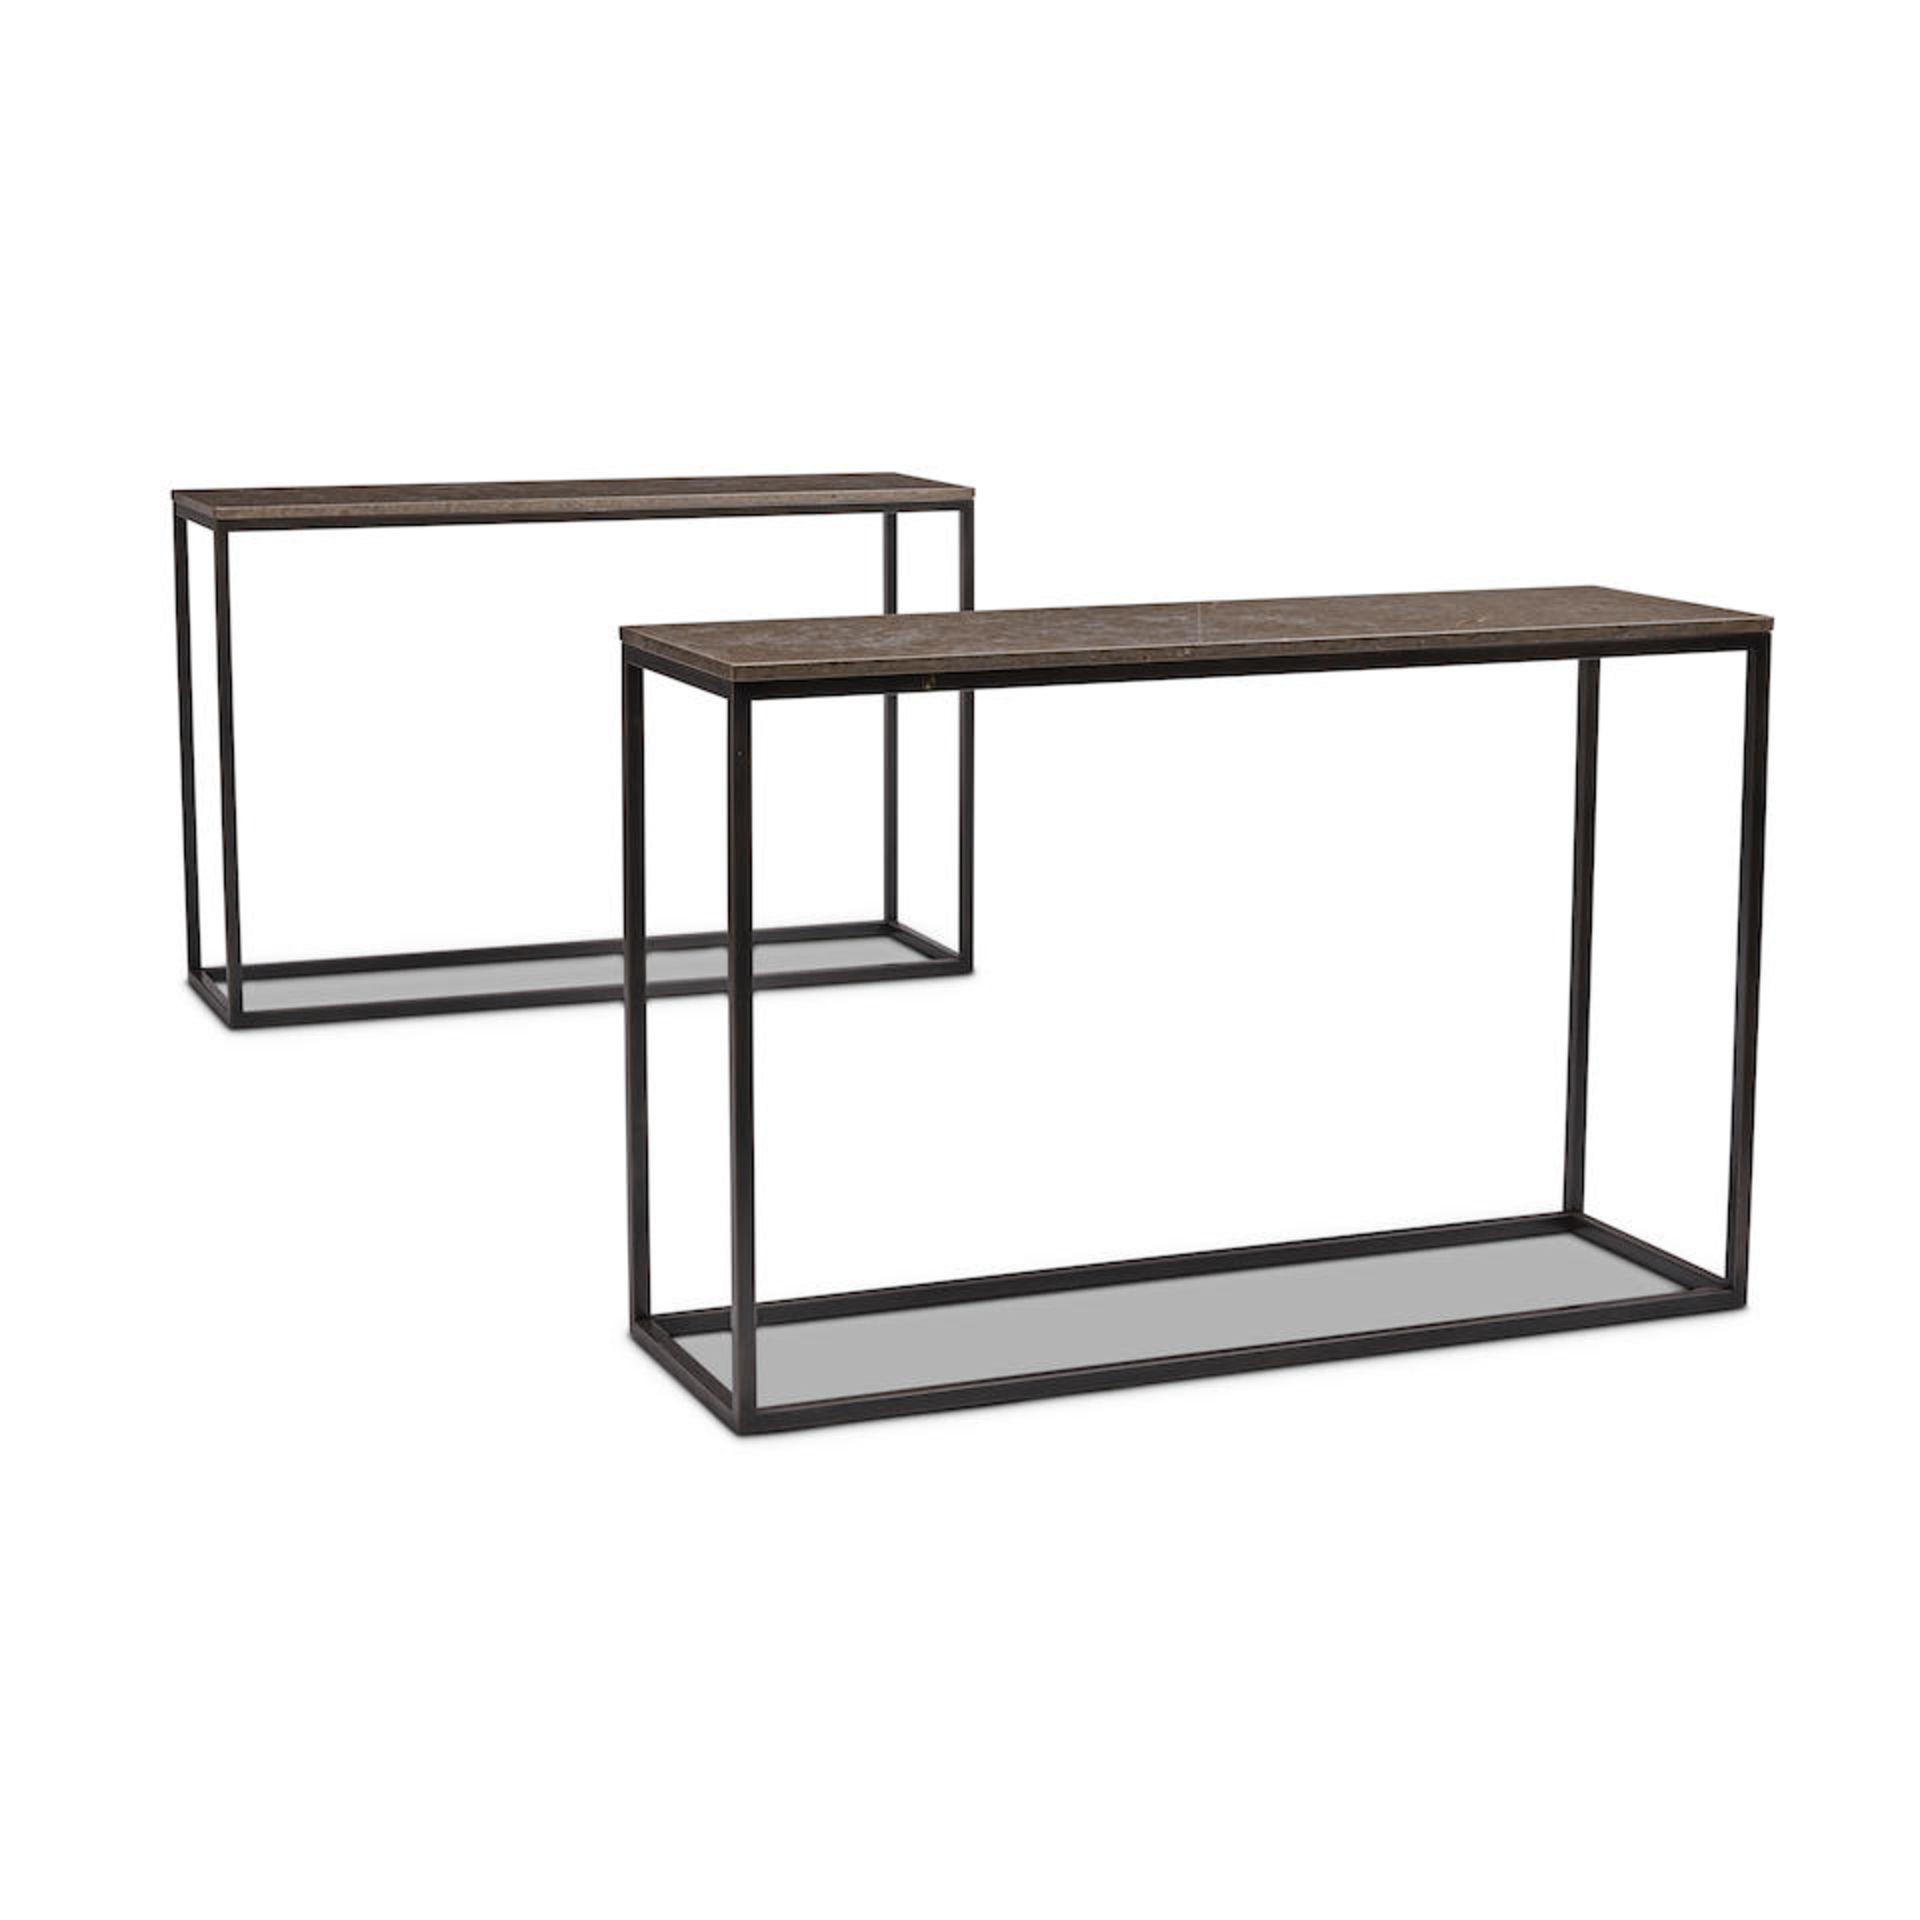 A PAIR OF STONE TOP METAL CONSOLE TABLES